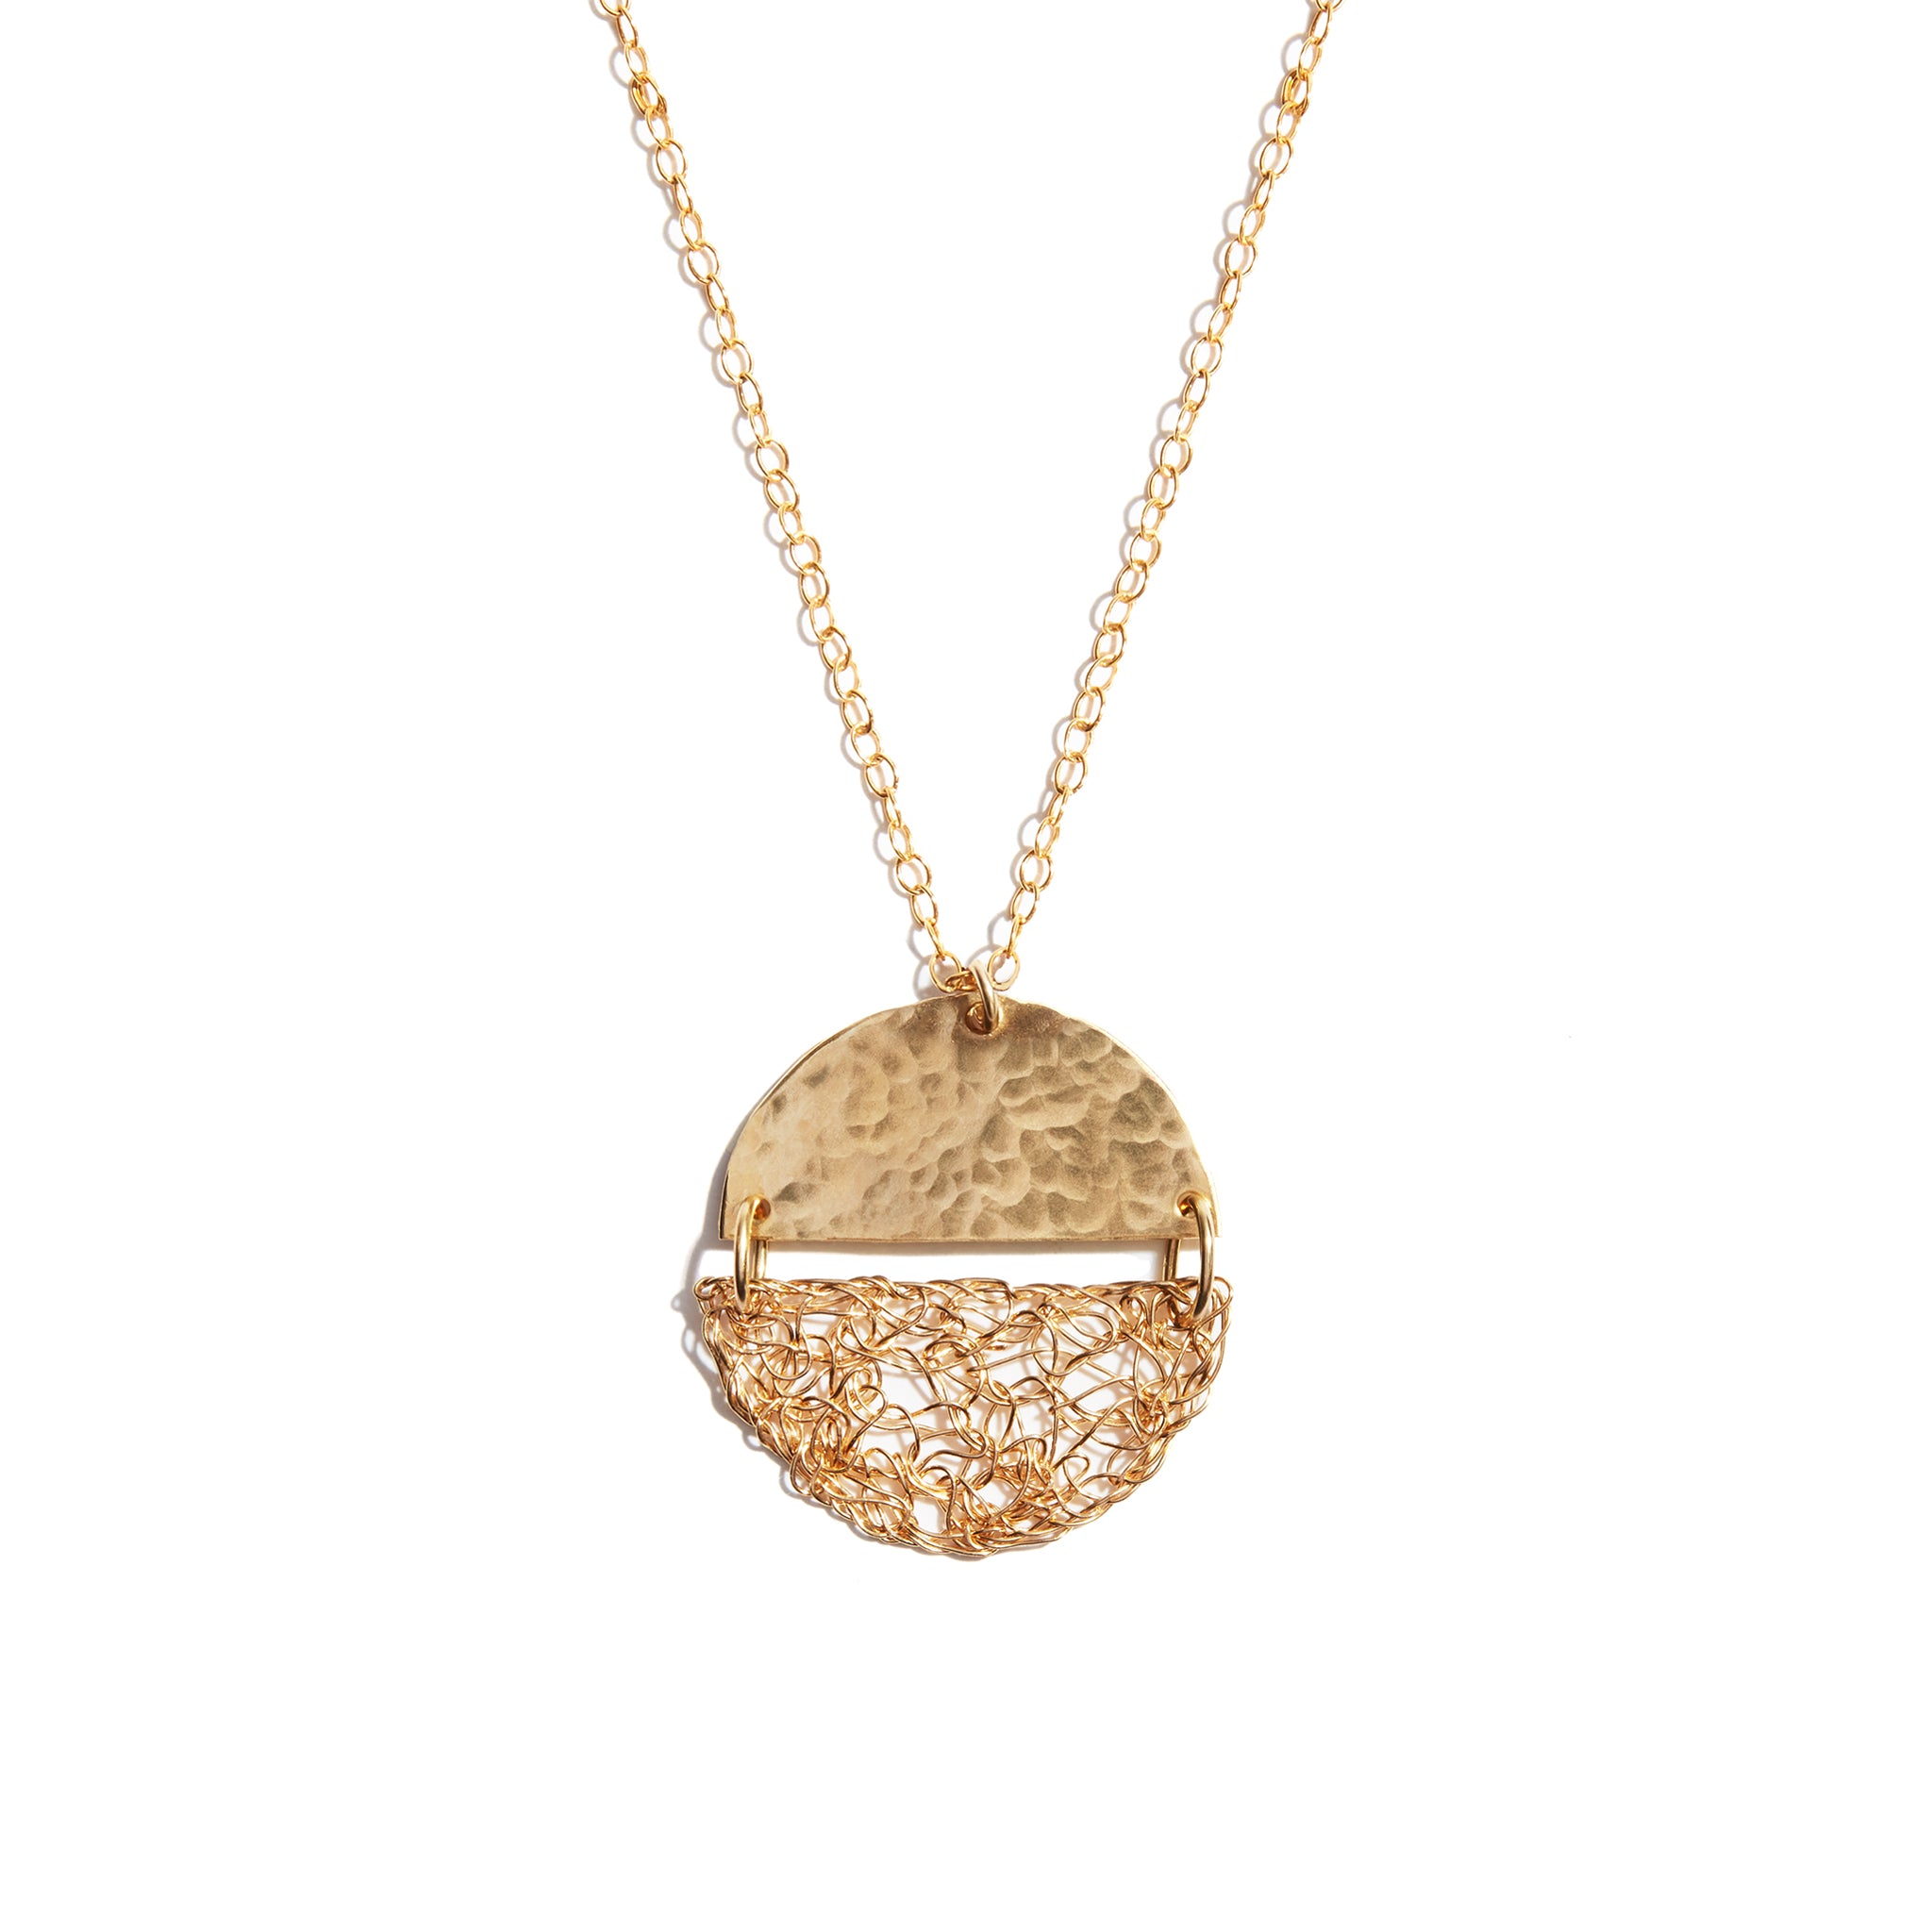 The Fí Half Moon Pendant marries two of Seoidín's signature styles; woven gold and hand-hammered gold, making this a wonderfully, authentically Seoidín piece.